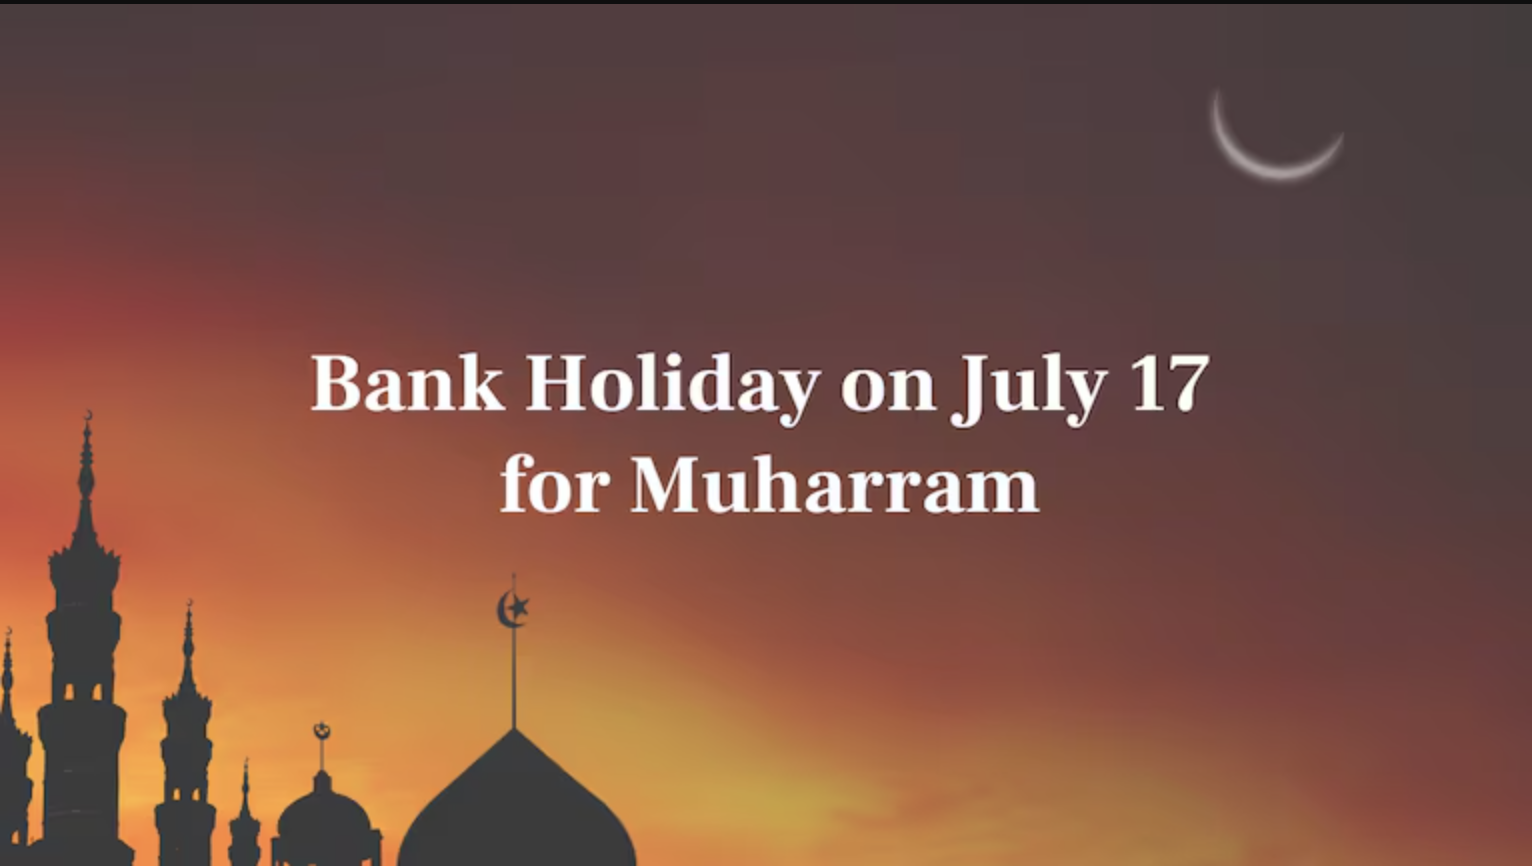 Banks Will Be Closed Across 17 States On July 17: Check Full List Of Muharram Holiday